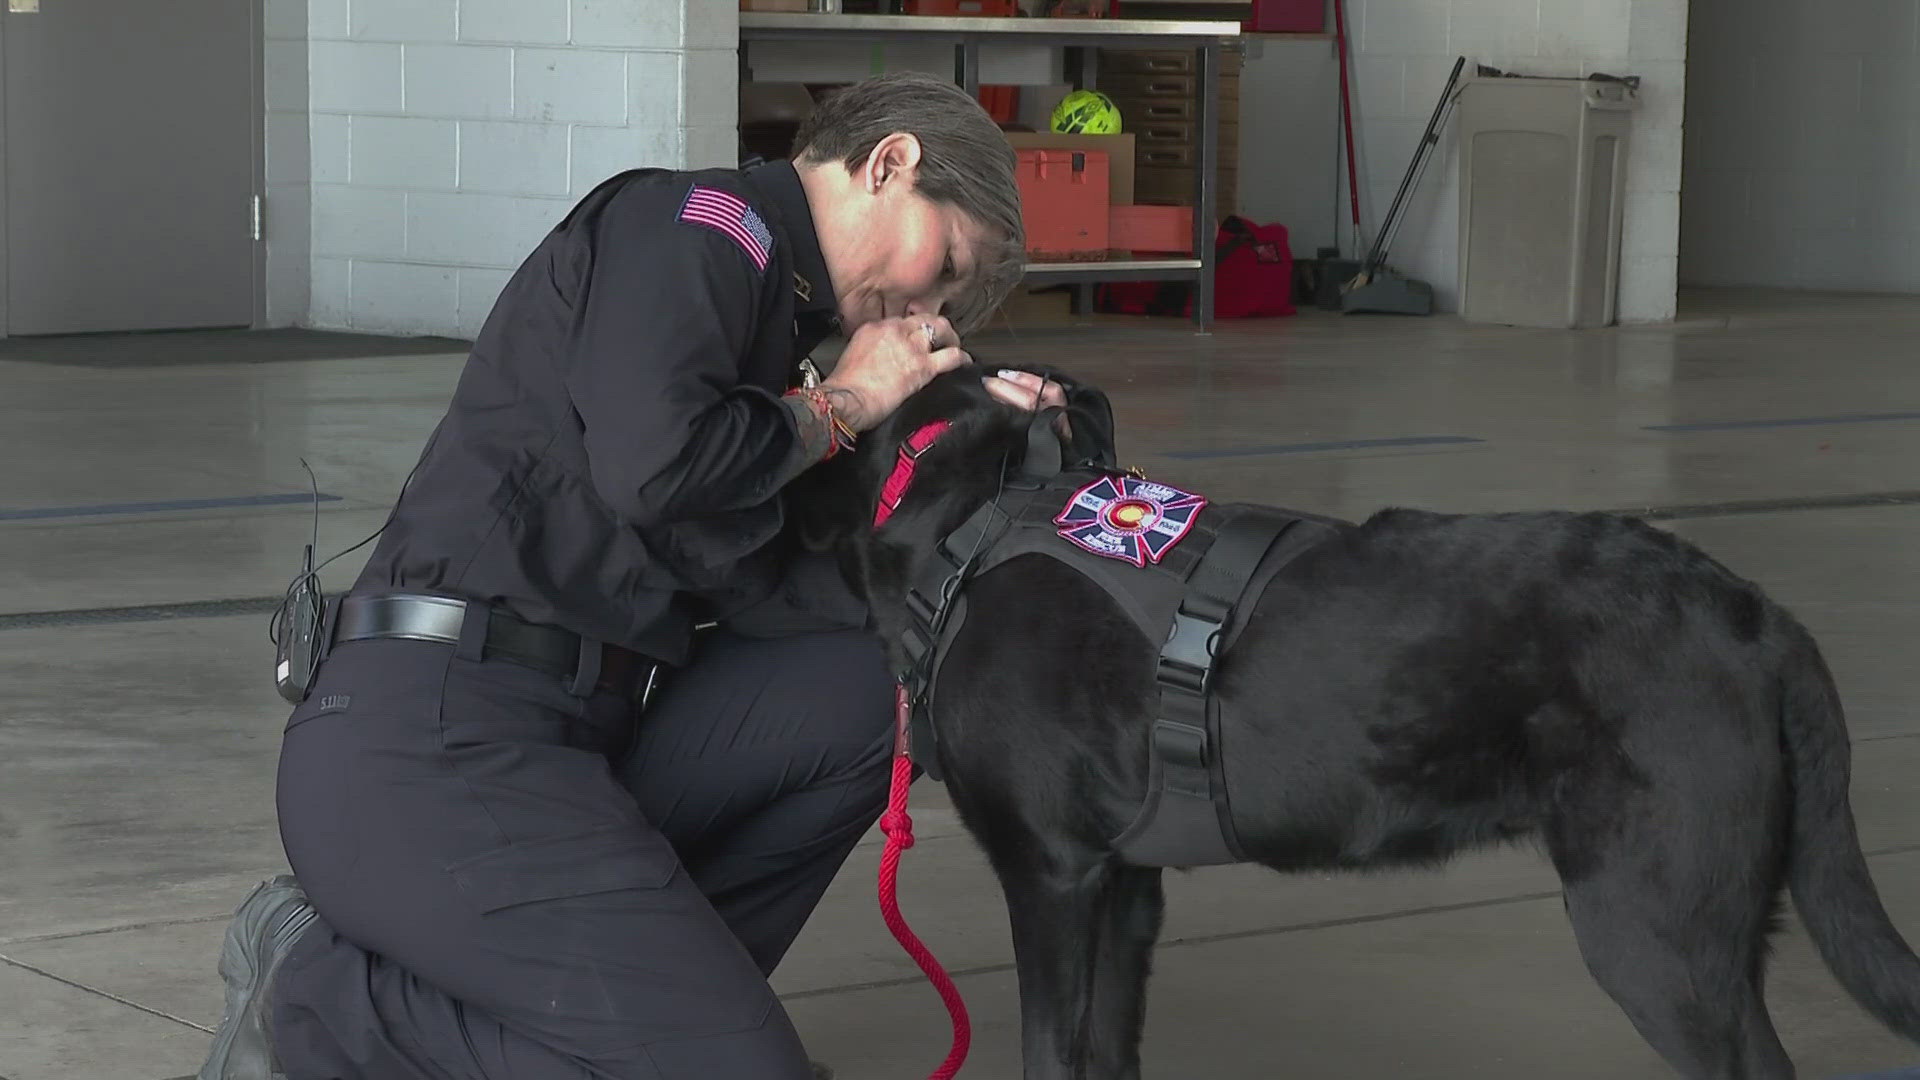 Arson dogs play a key role in helping determine the cause of many fires. Without these dogs, it can take longer to investigate a fire, costing taxpayers more money.